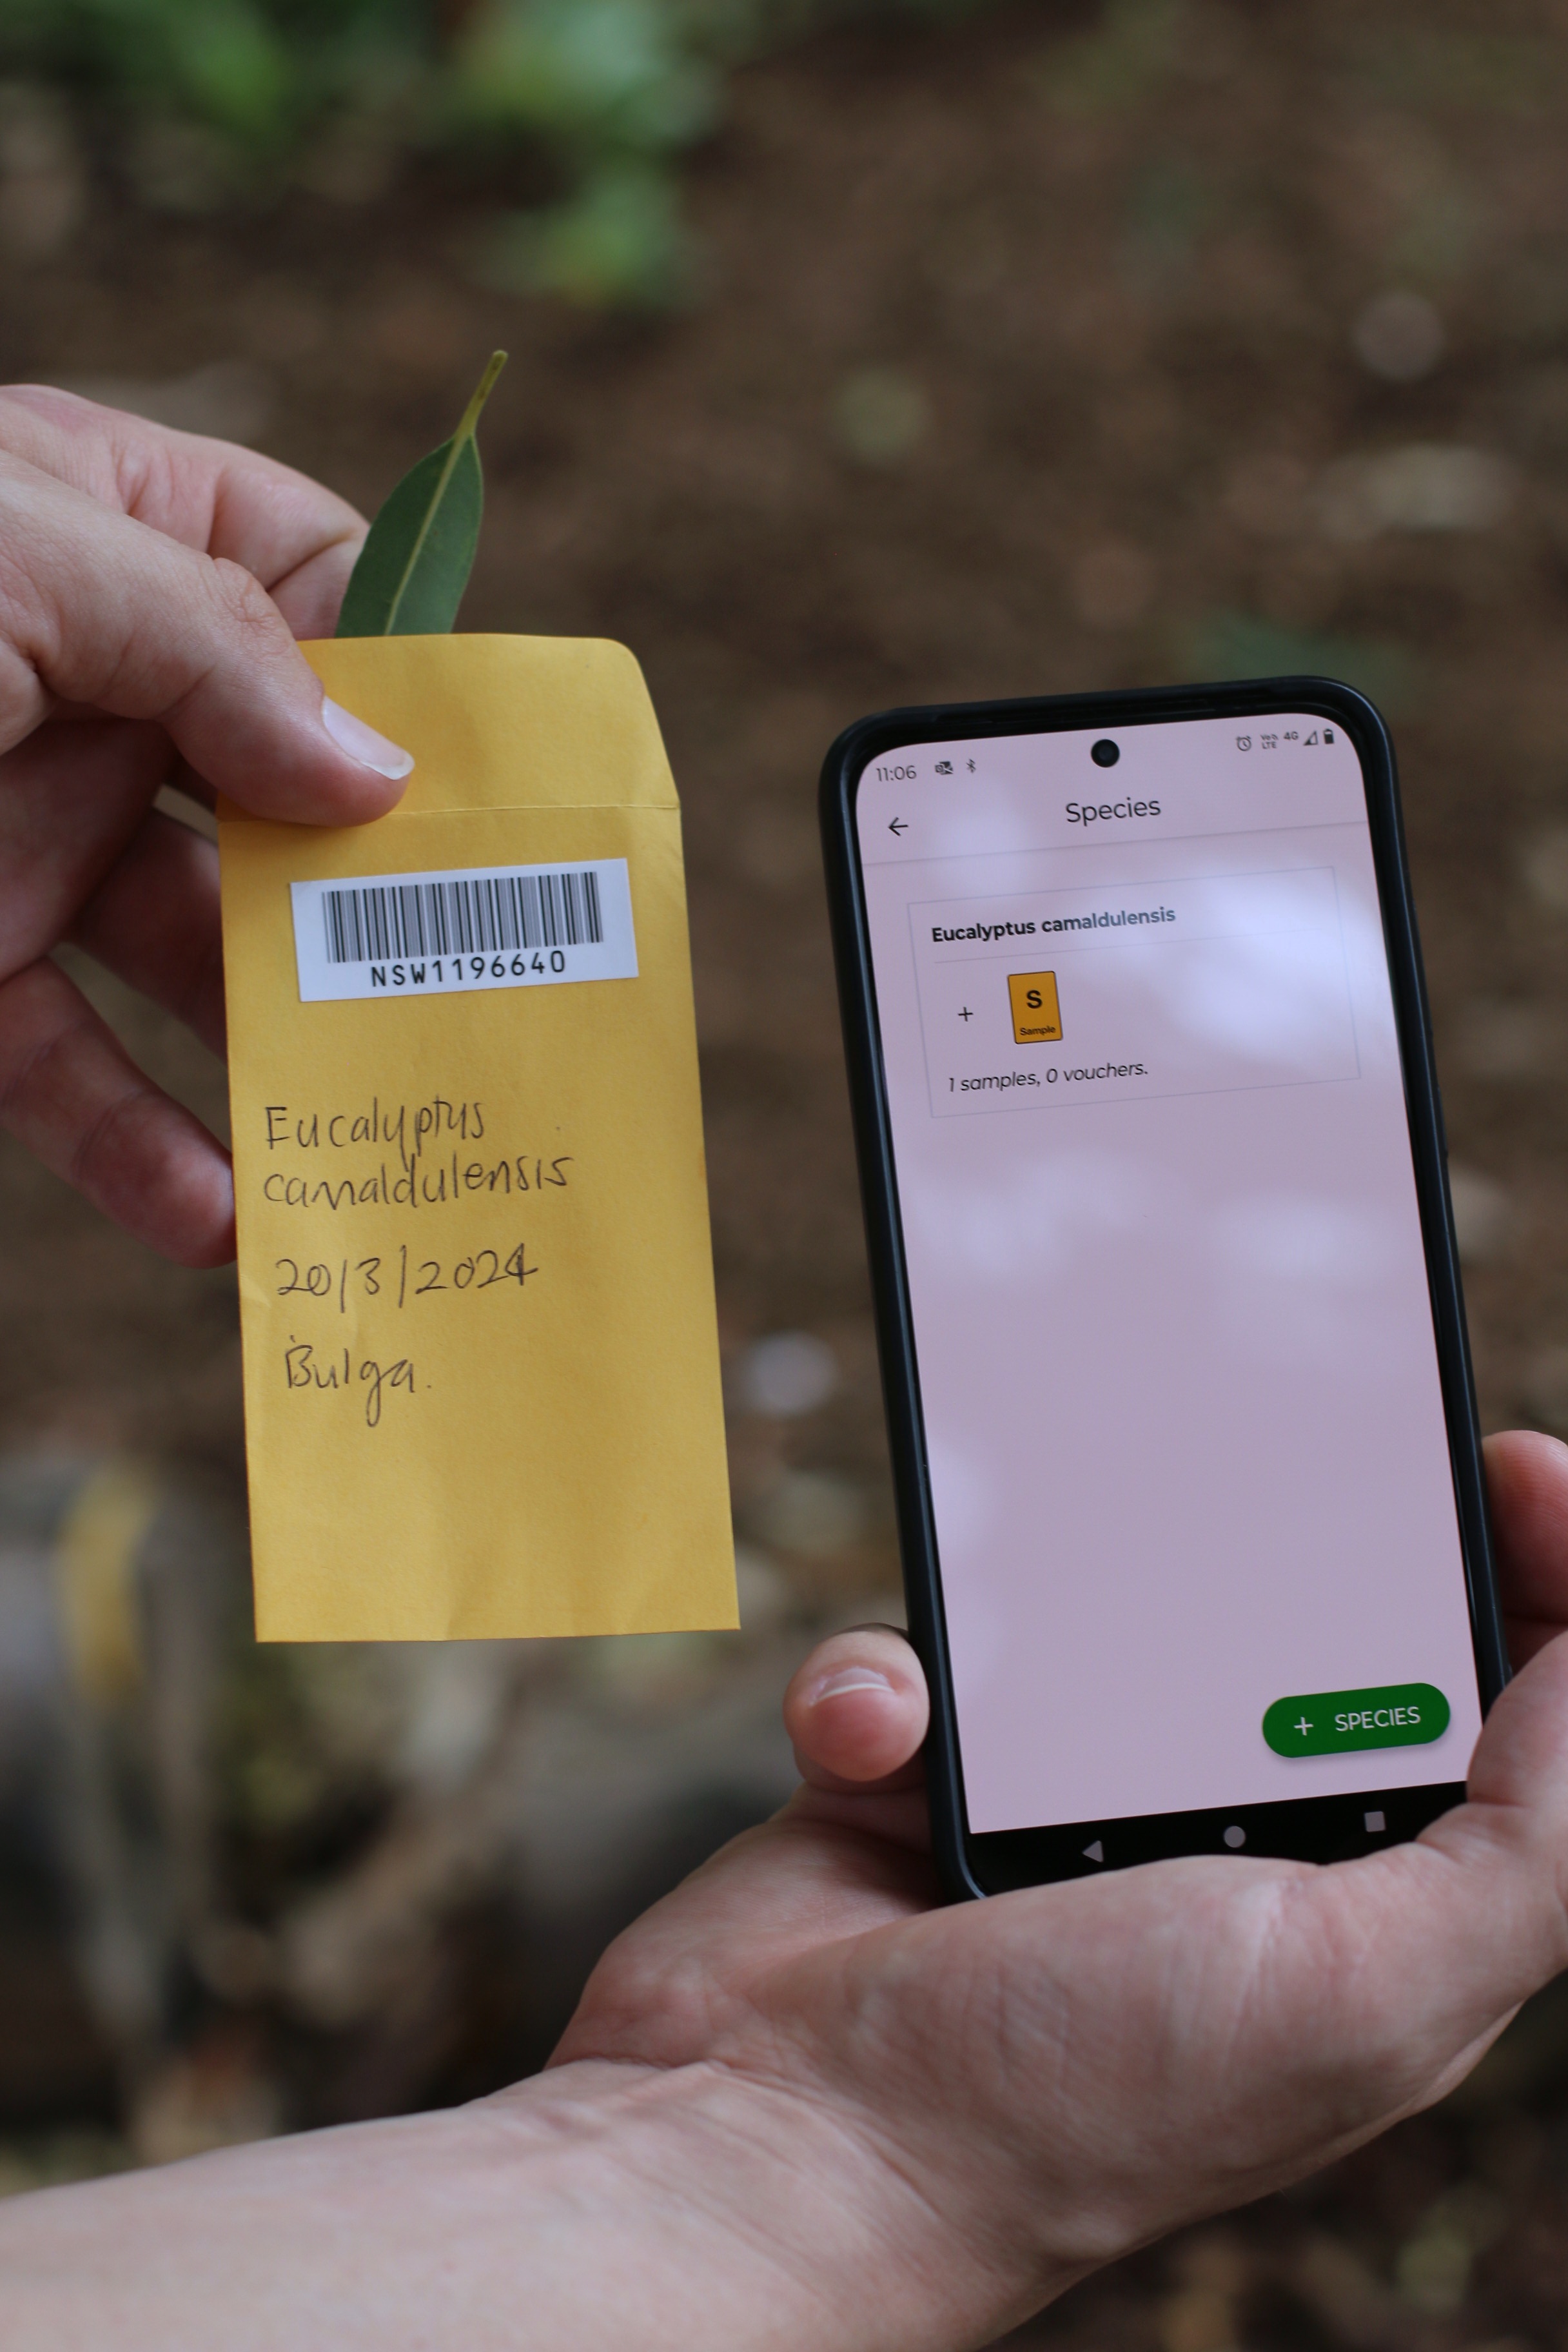 a hand holding a phone and a yellow envelope